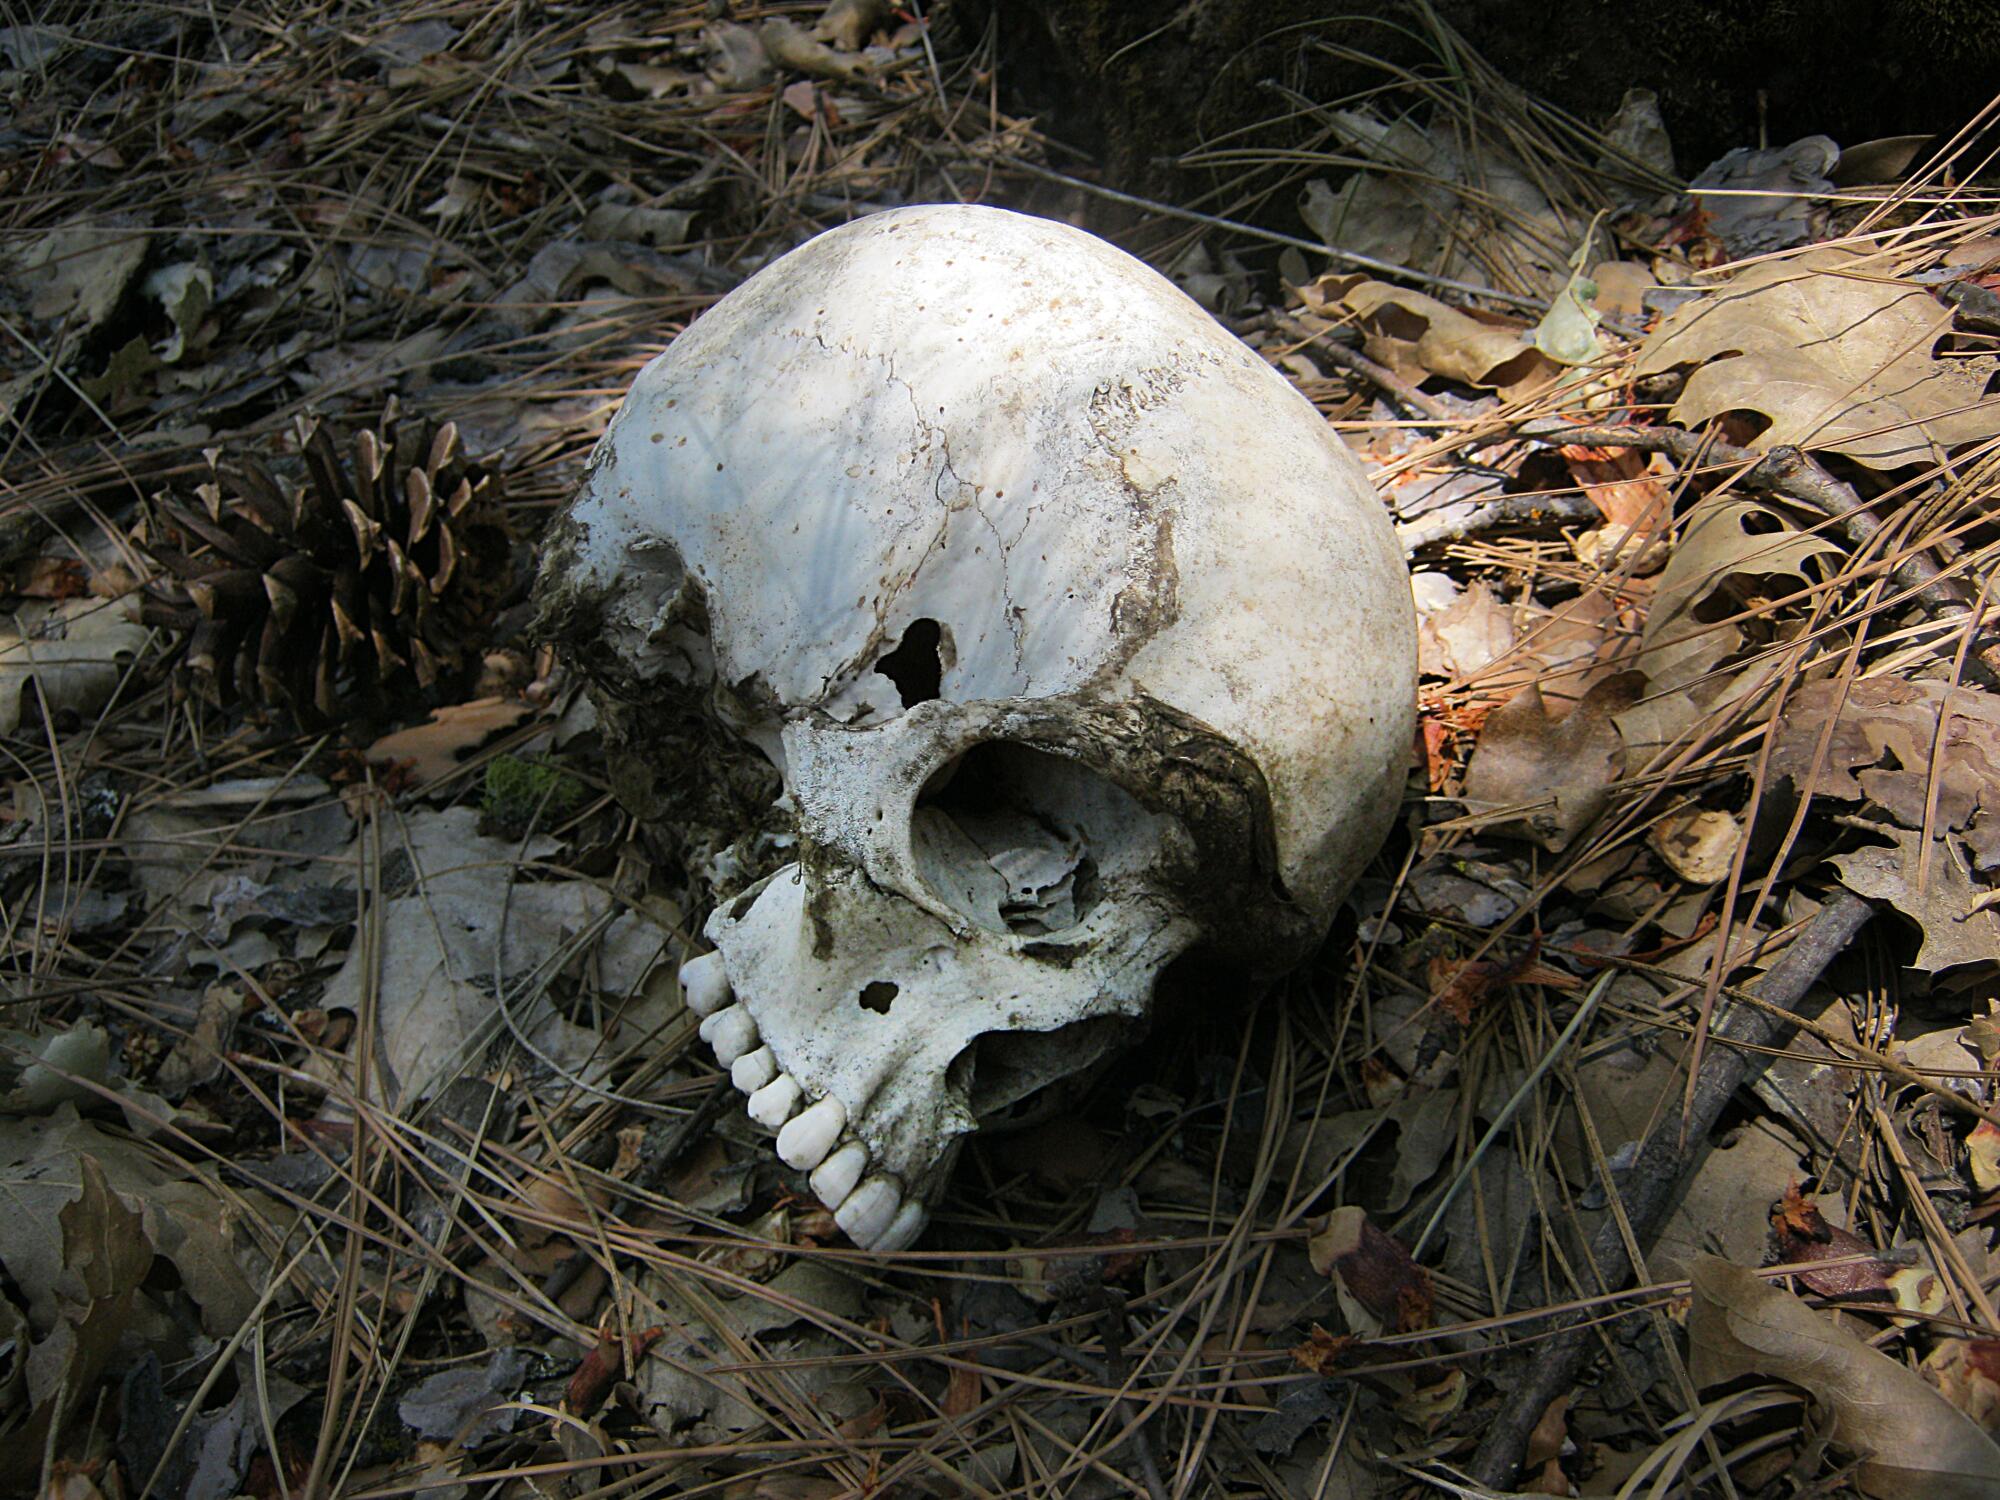 A skull on the floor of Stanislaus National Forest